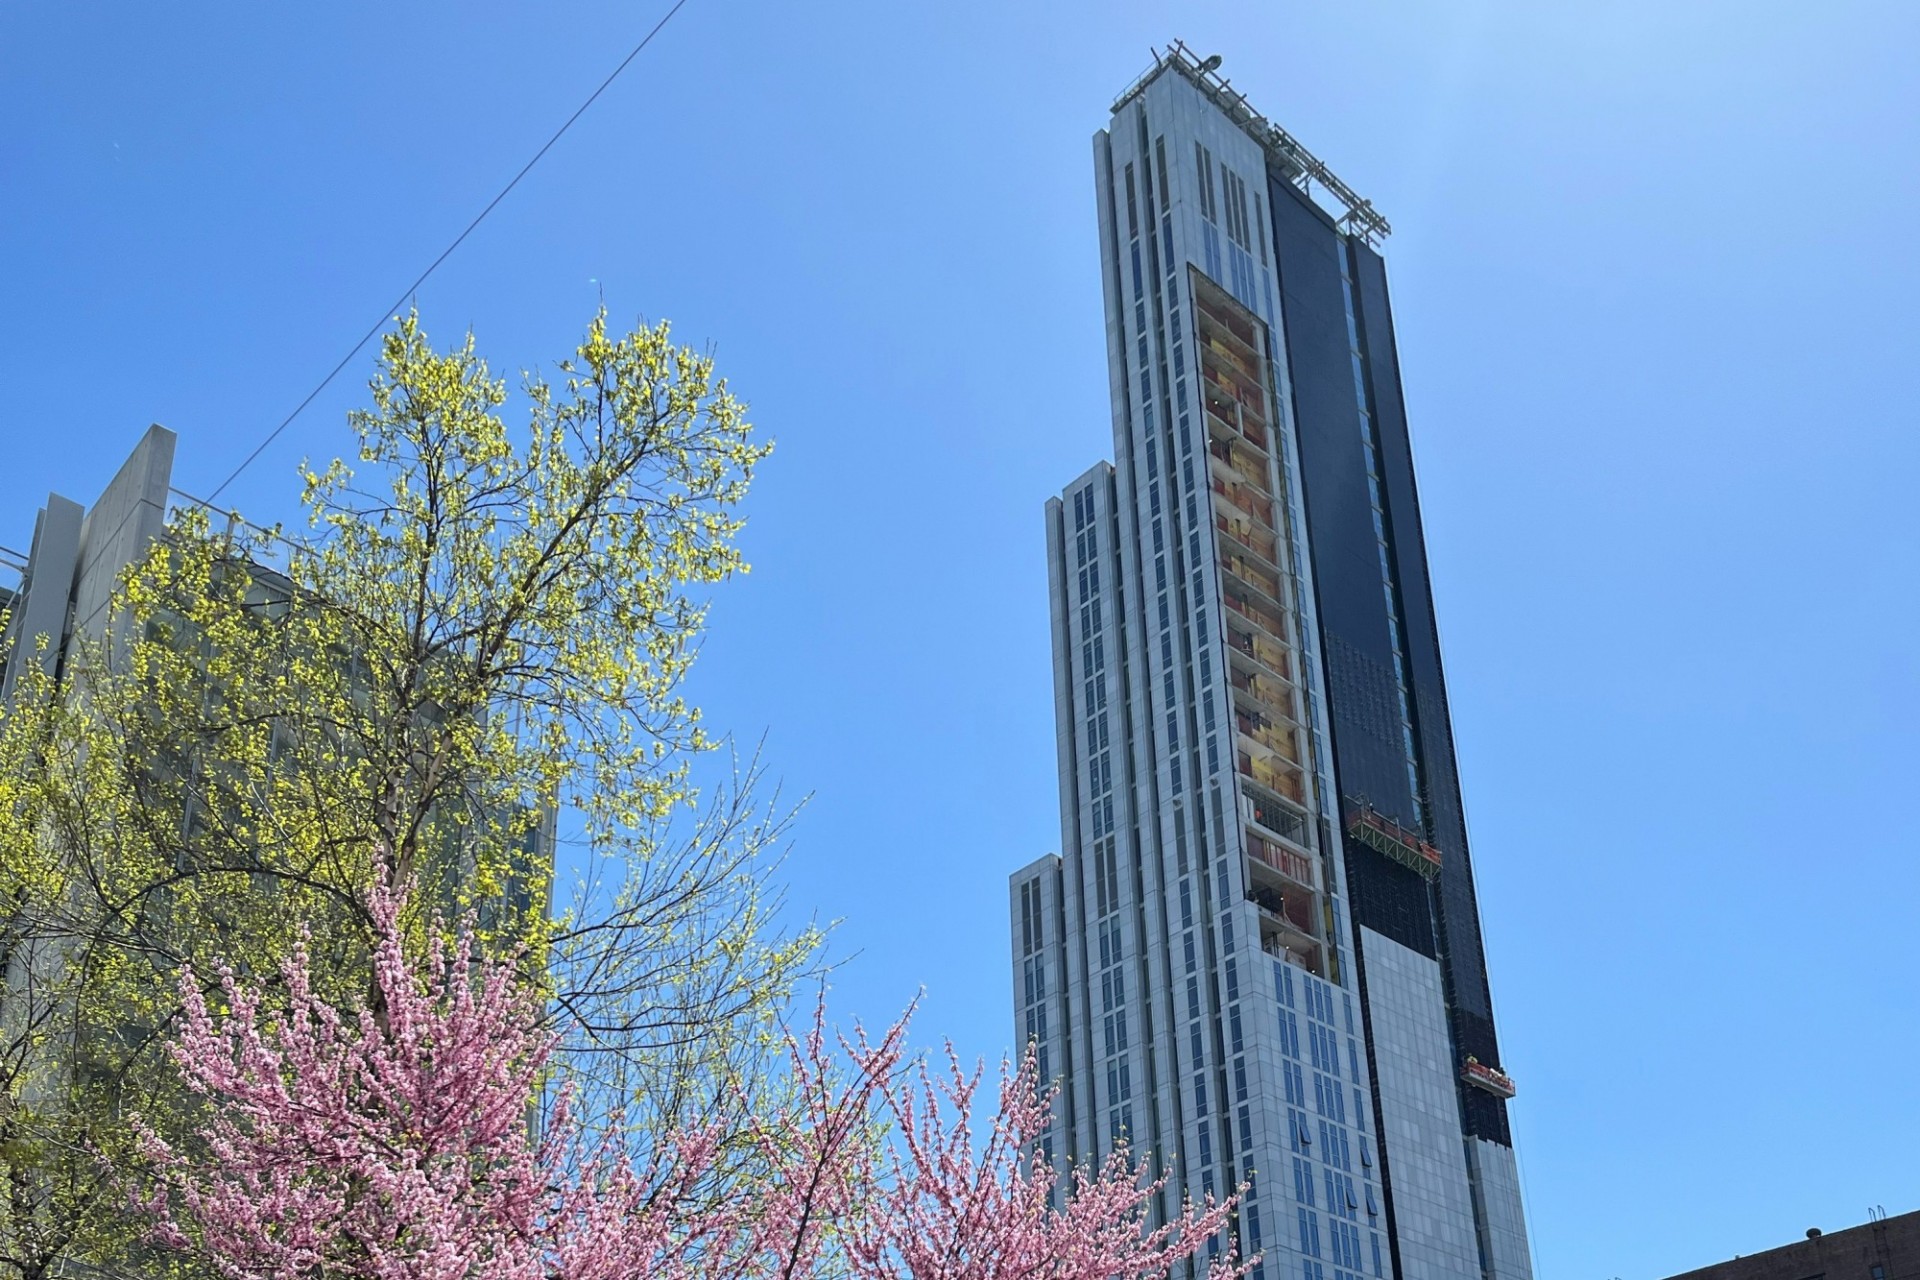 A view of 600 W. 125th Street, with a budding tree and cherry blossom tree in the foreground